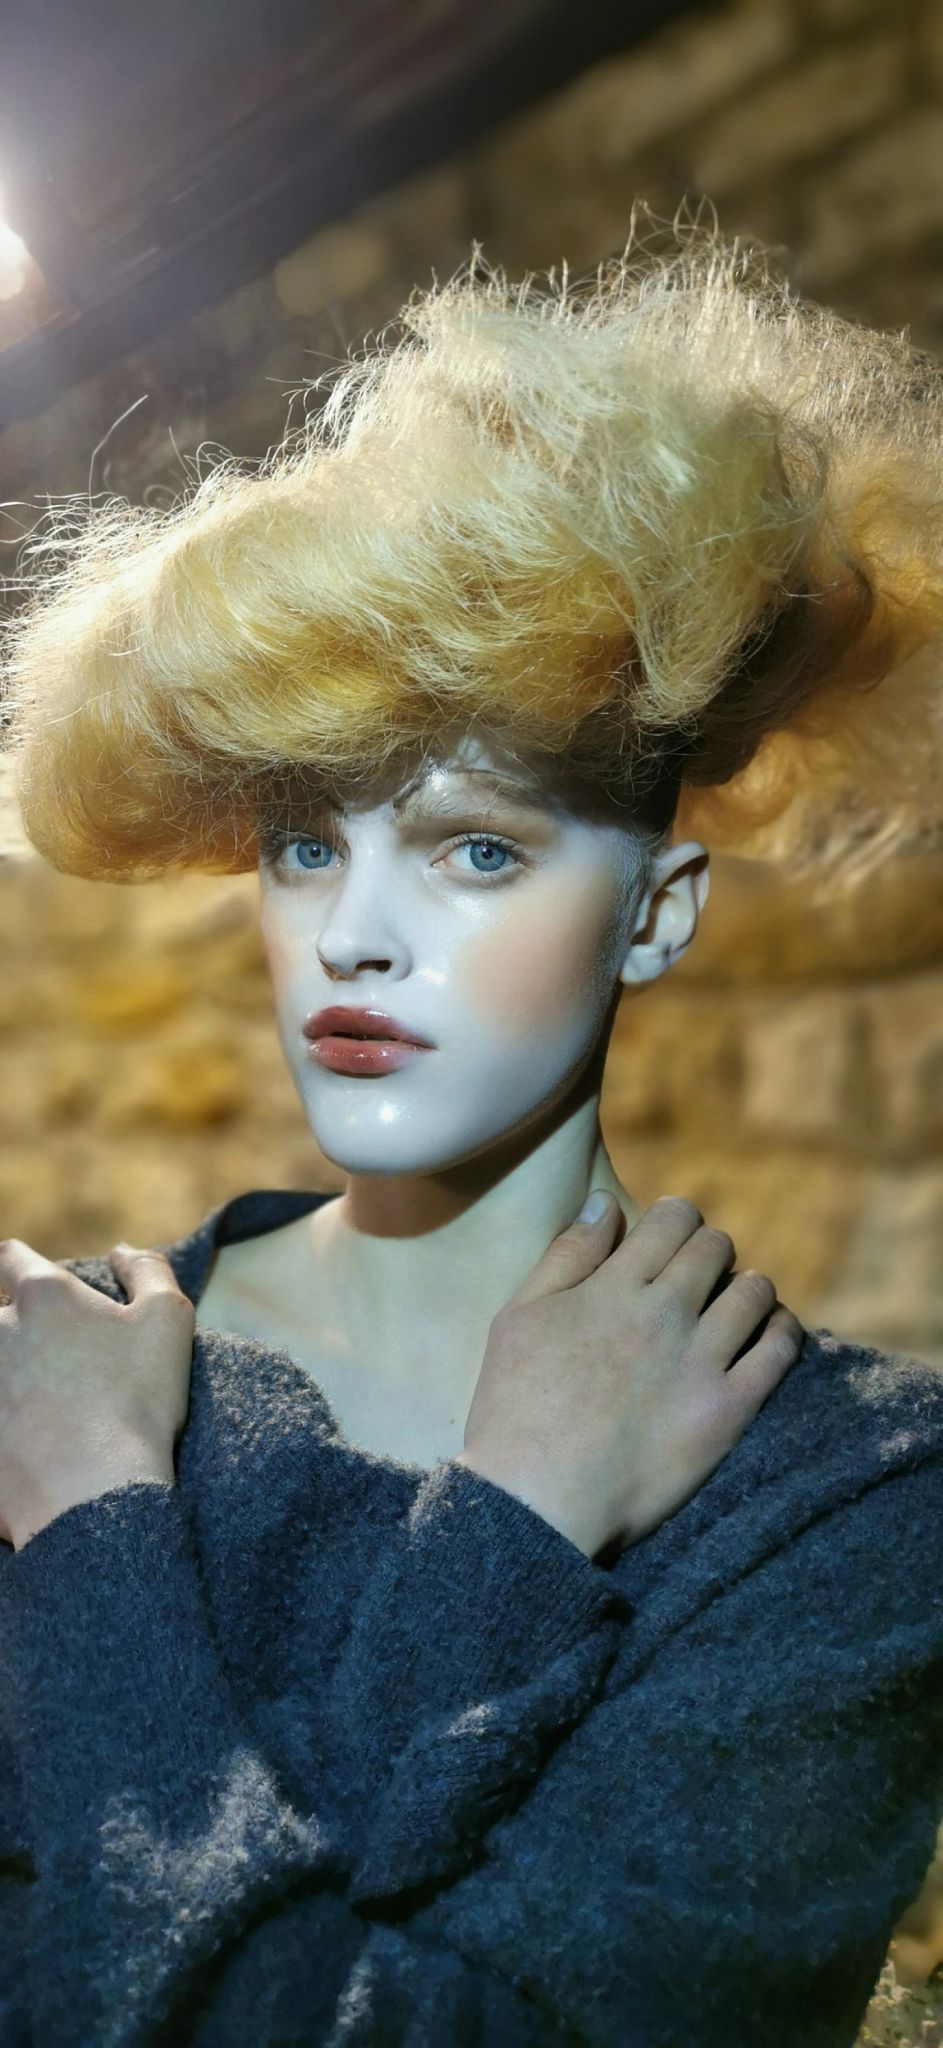 Recreate the Porcelain Doll Effect from the Maison Margiela Couture Show